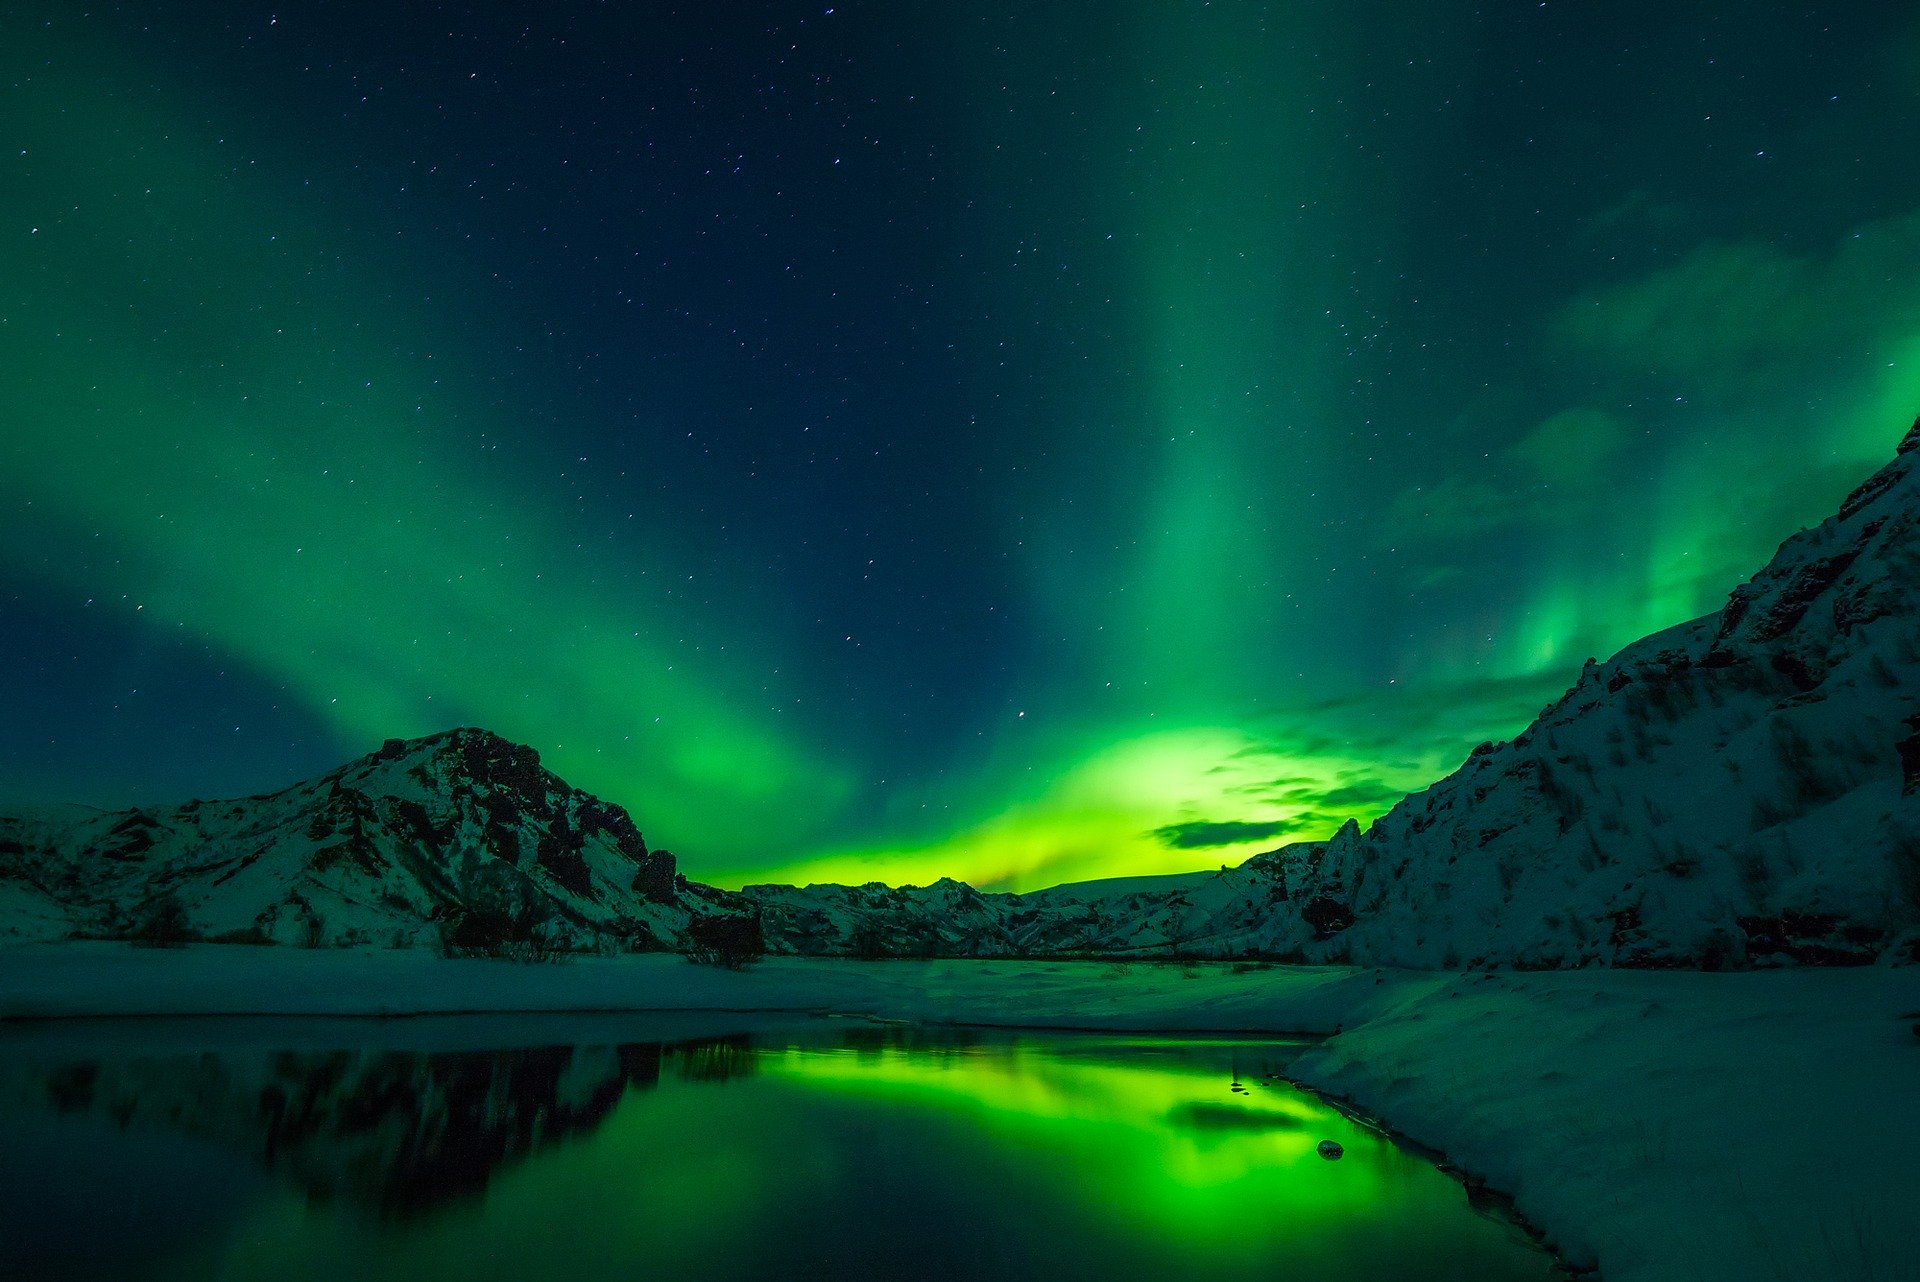 Best ways to see the northern lights